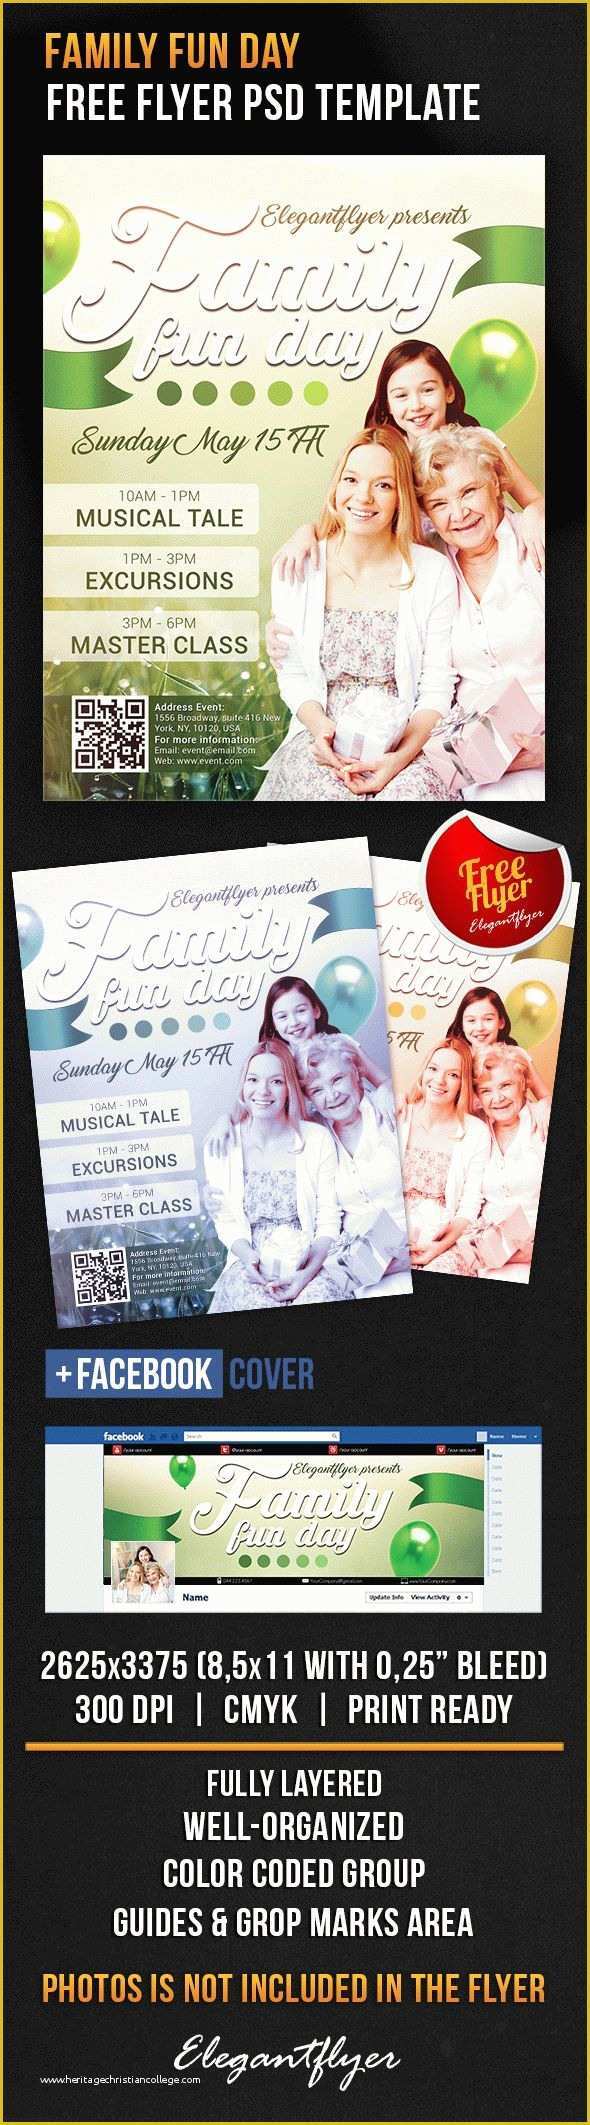 Fun Day Flyer Template Free Of Family Fun Day – Free Flyer Psd Template – by Elegantflyer